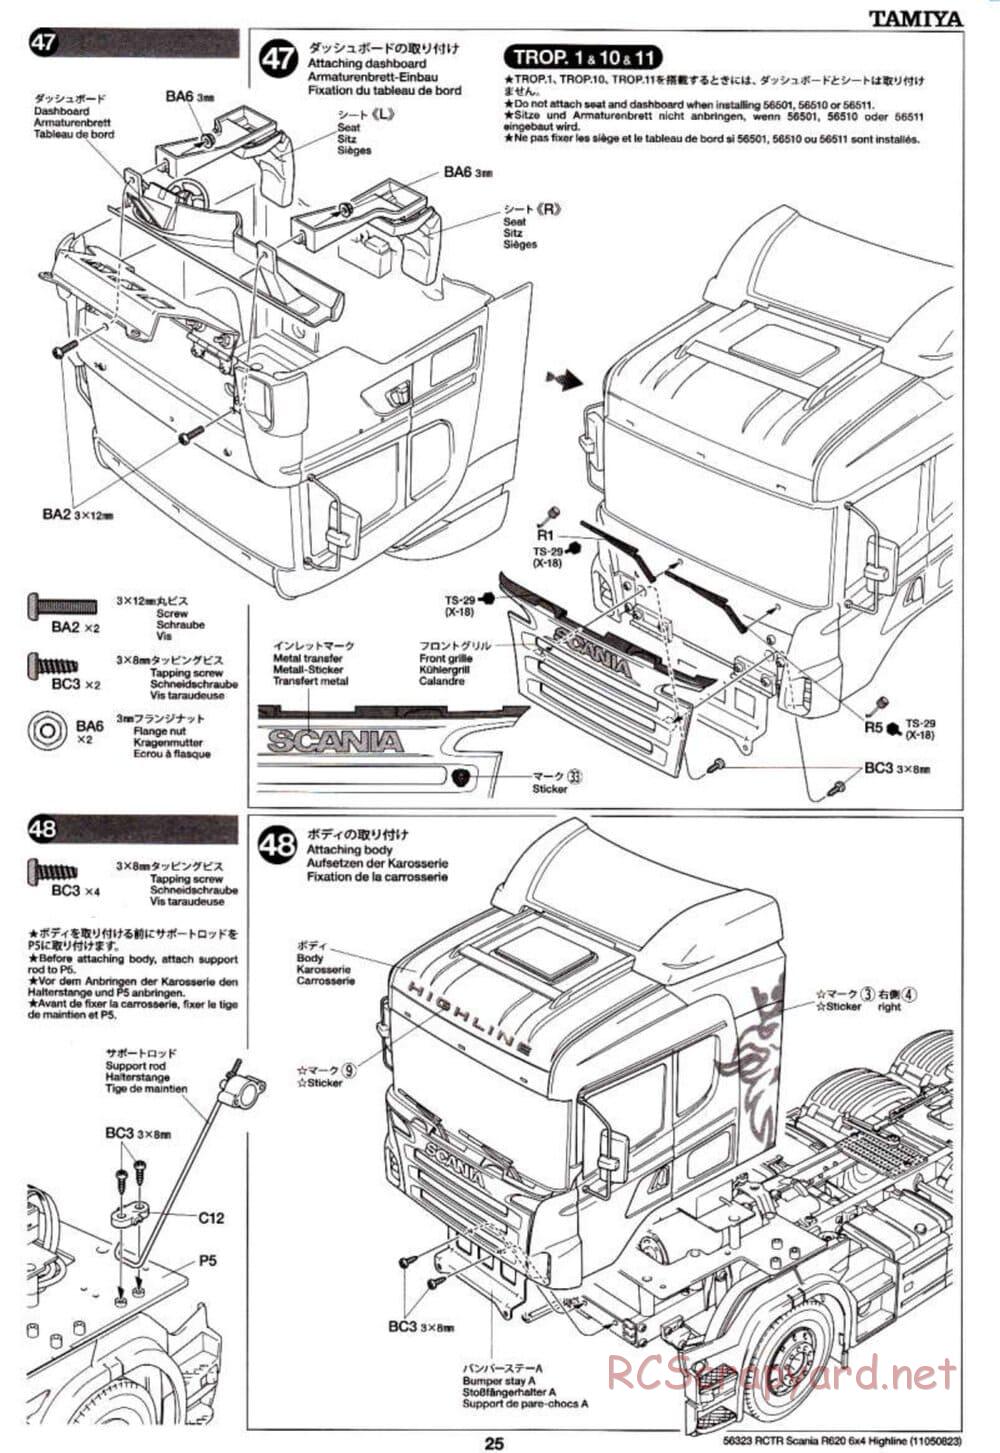 Tamiya - Scania R620 6x4 Highline Tractor Truck Chassis - Manual - Page 25